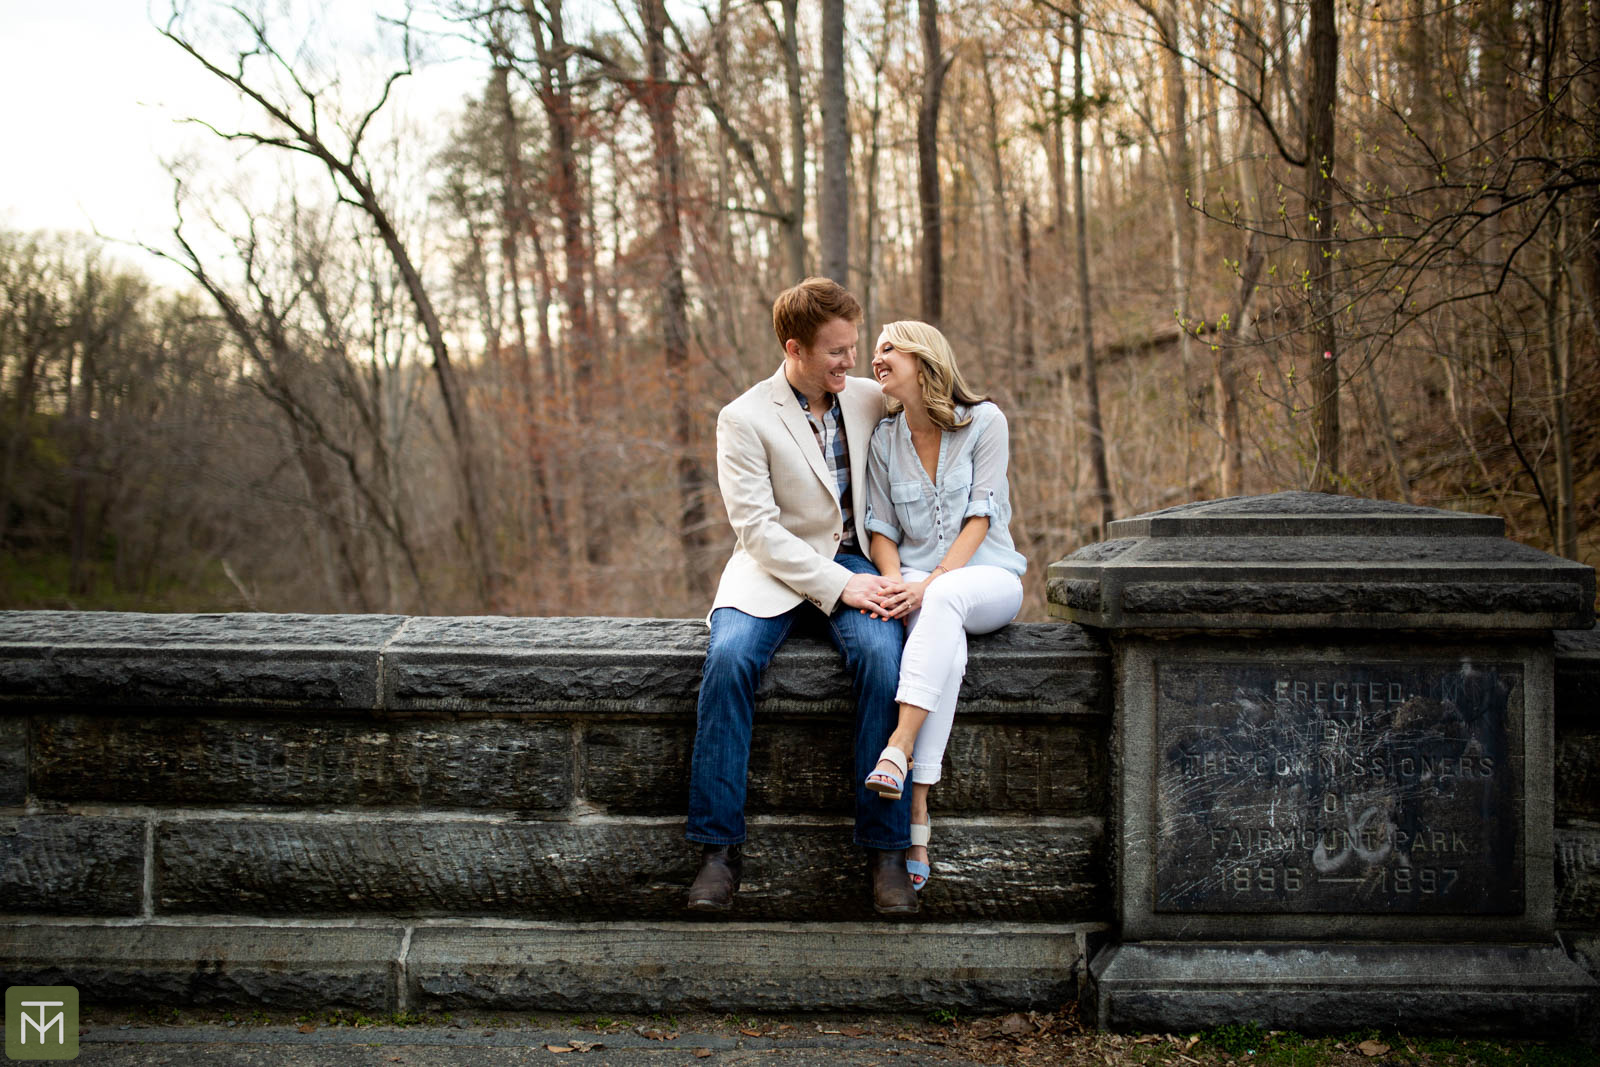 Brian & Sarah {Esession by Haley}